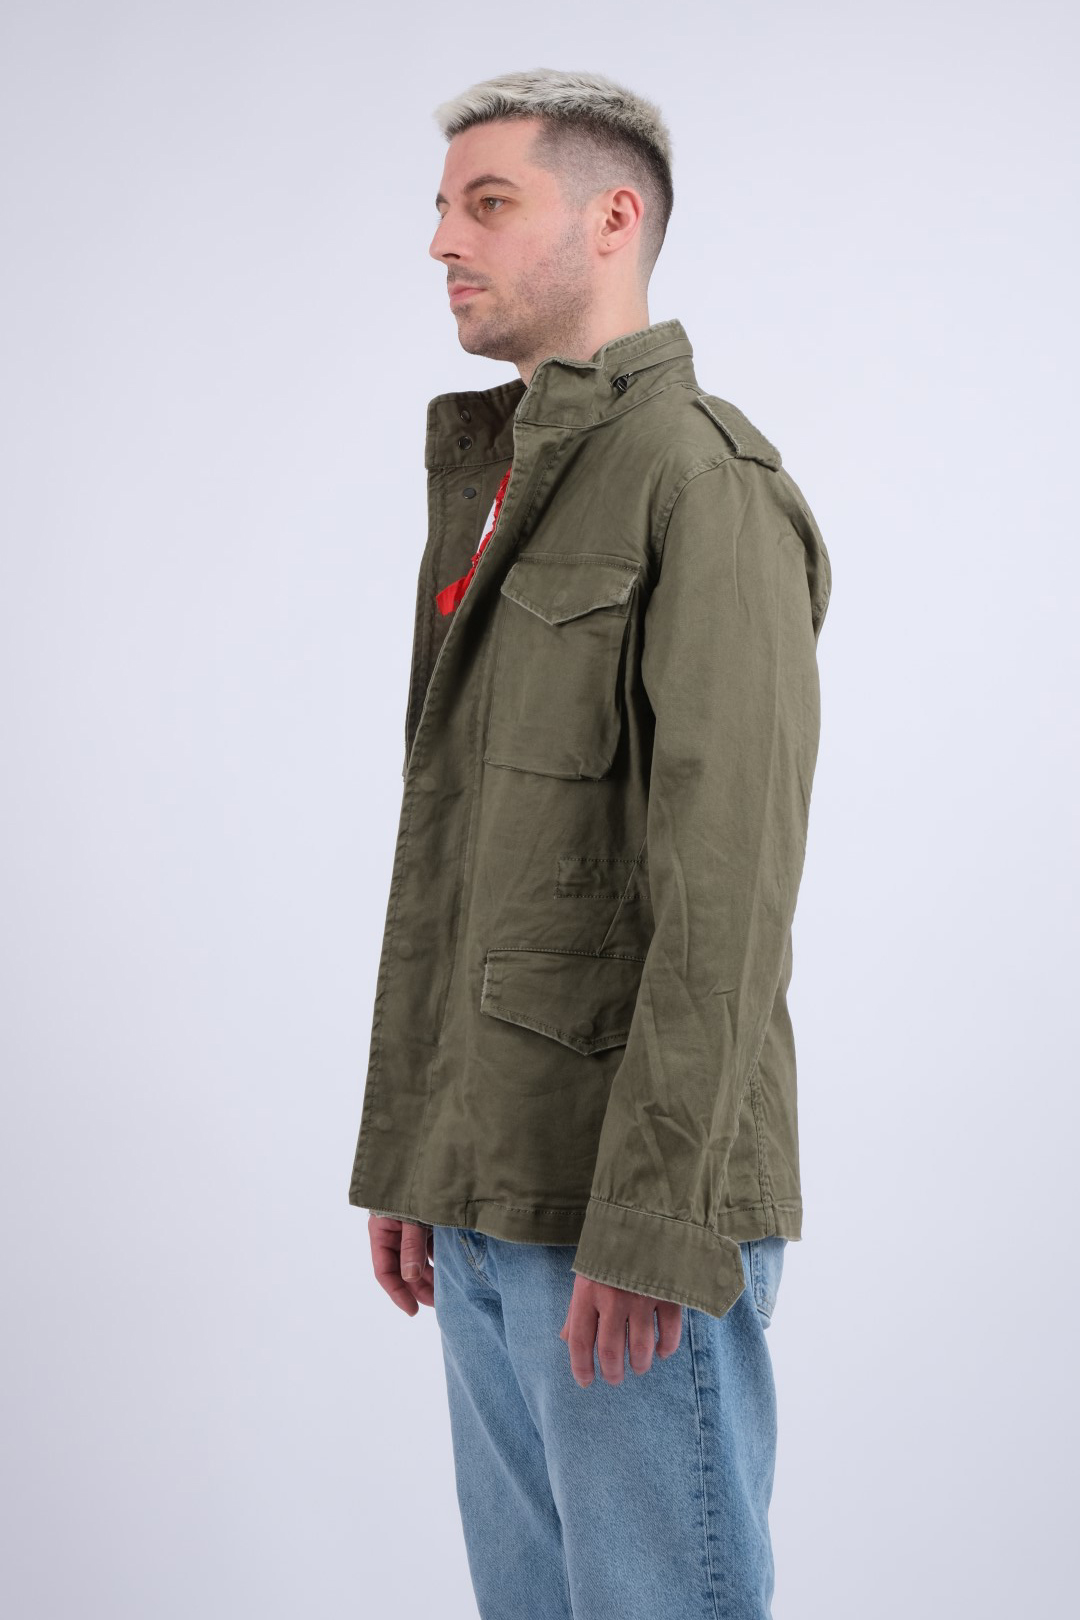 M65 MILITARY JACKET - MILITARY GREEN